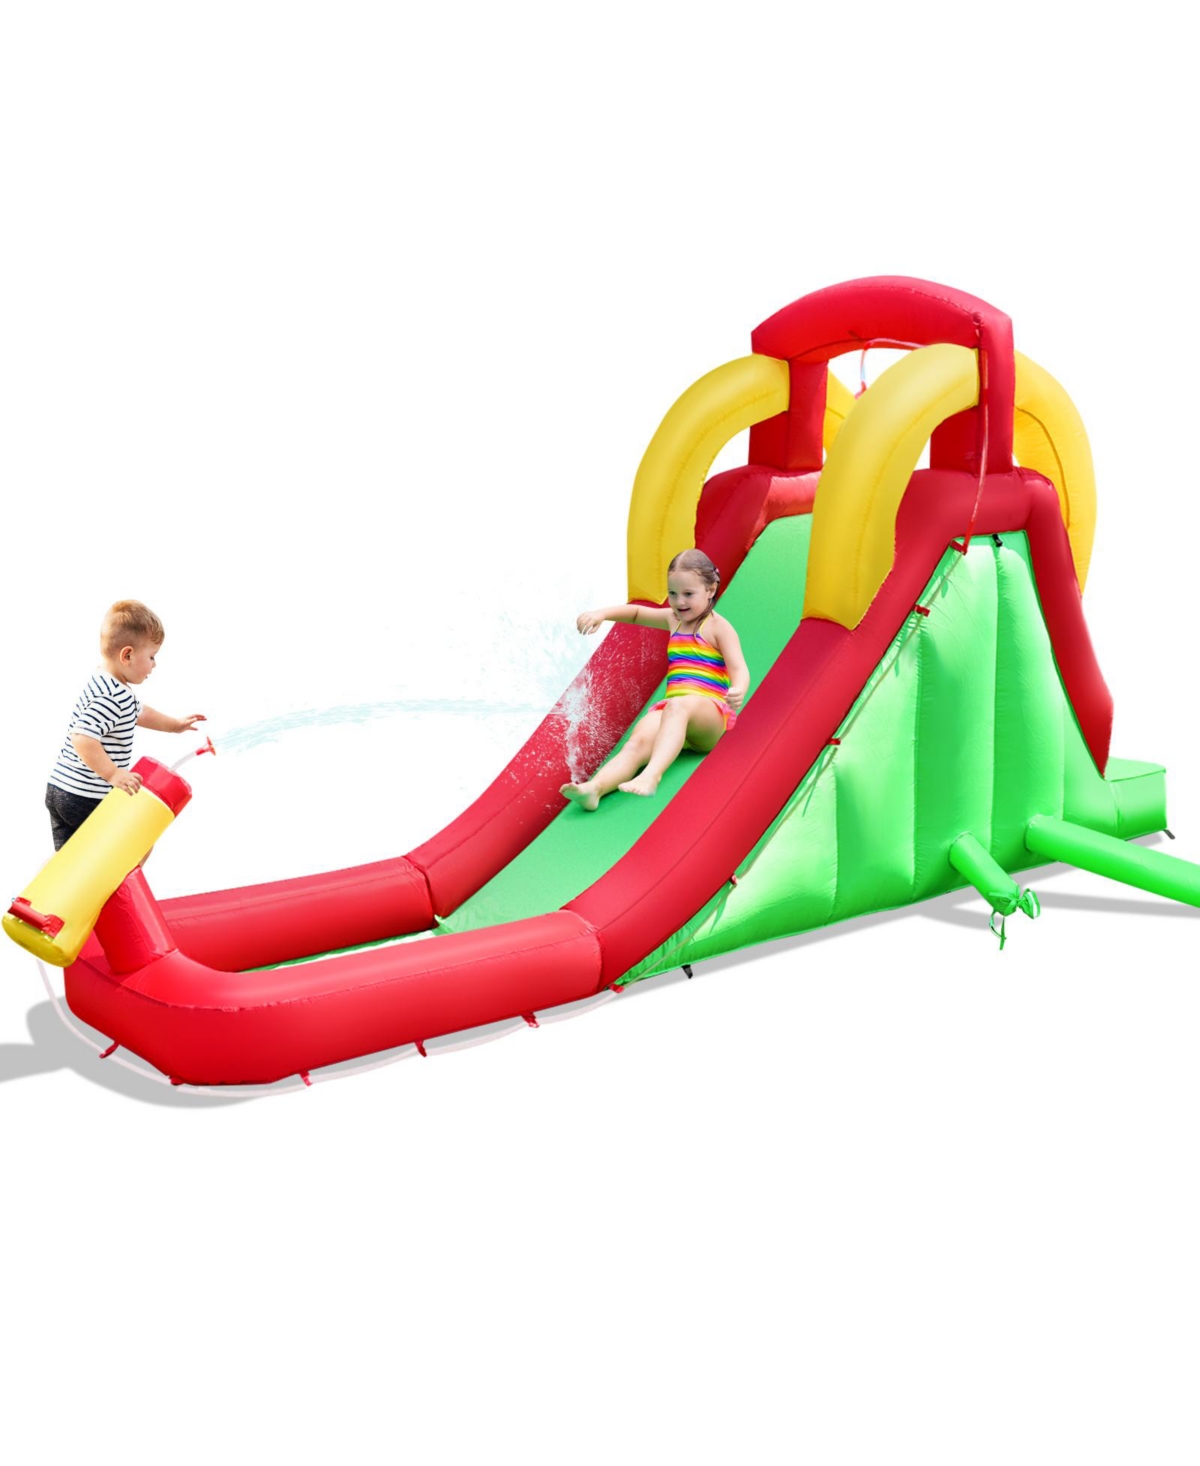 Inflatable Water Slide Bounce House with Climbing Wall and Jumper without Blower - Open Miscellaneous